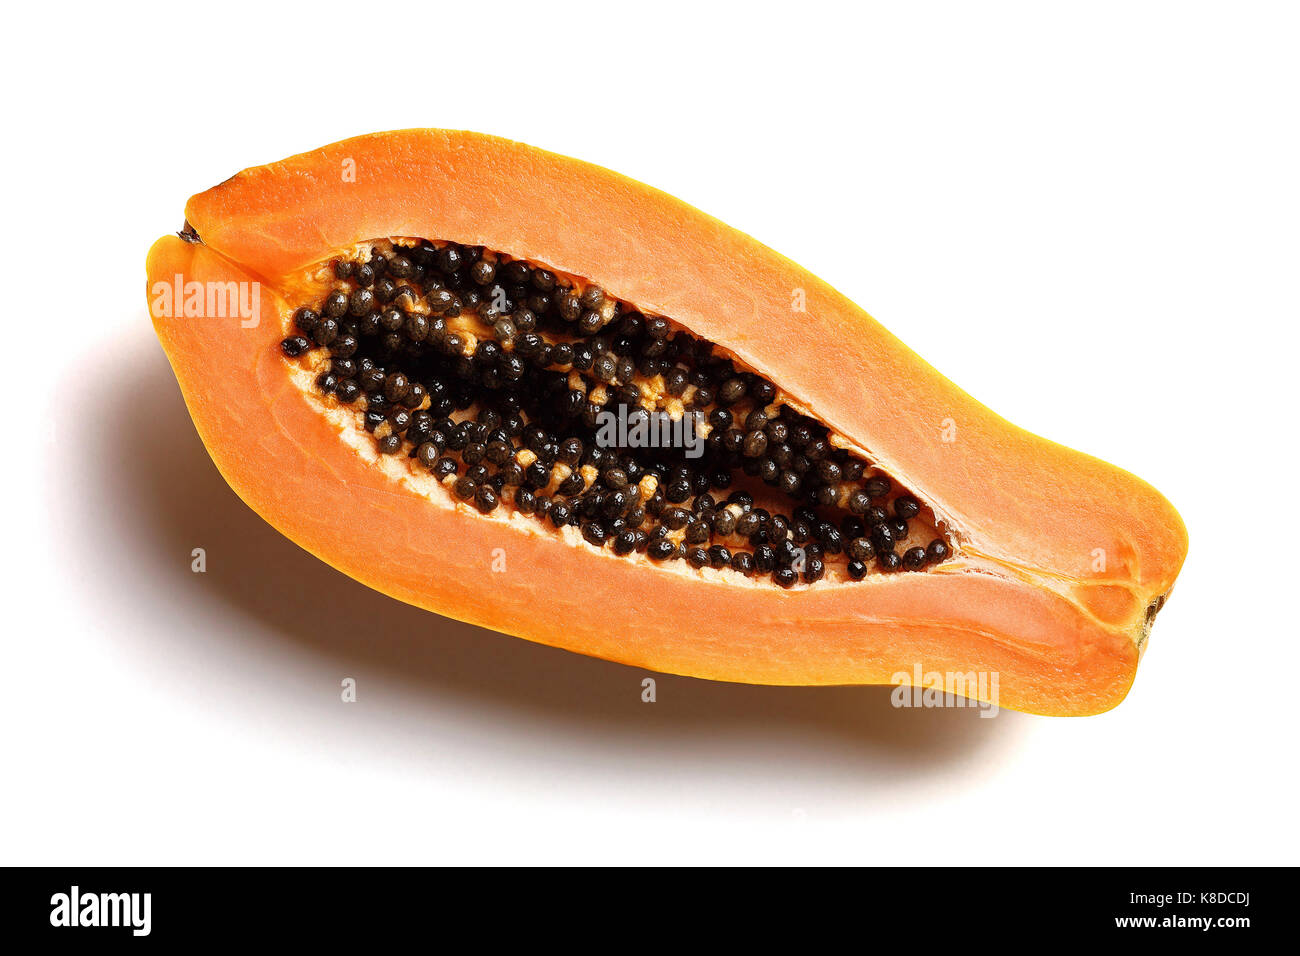 Papaya fruit (Paw Paw) cut in half on a plain white background from above Stock Photo